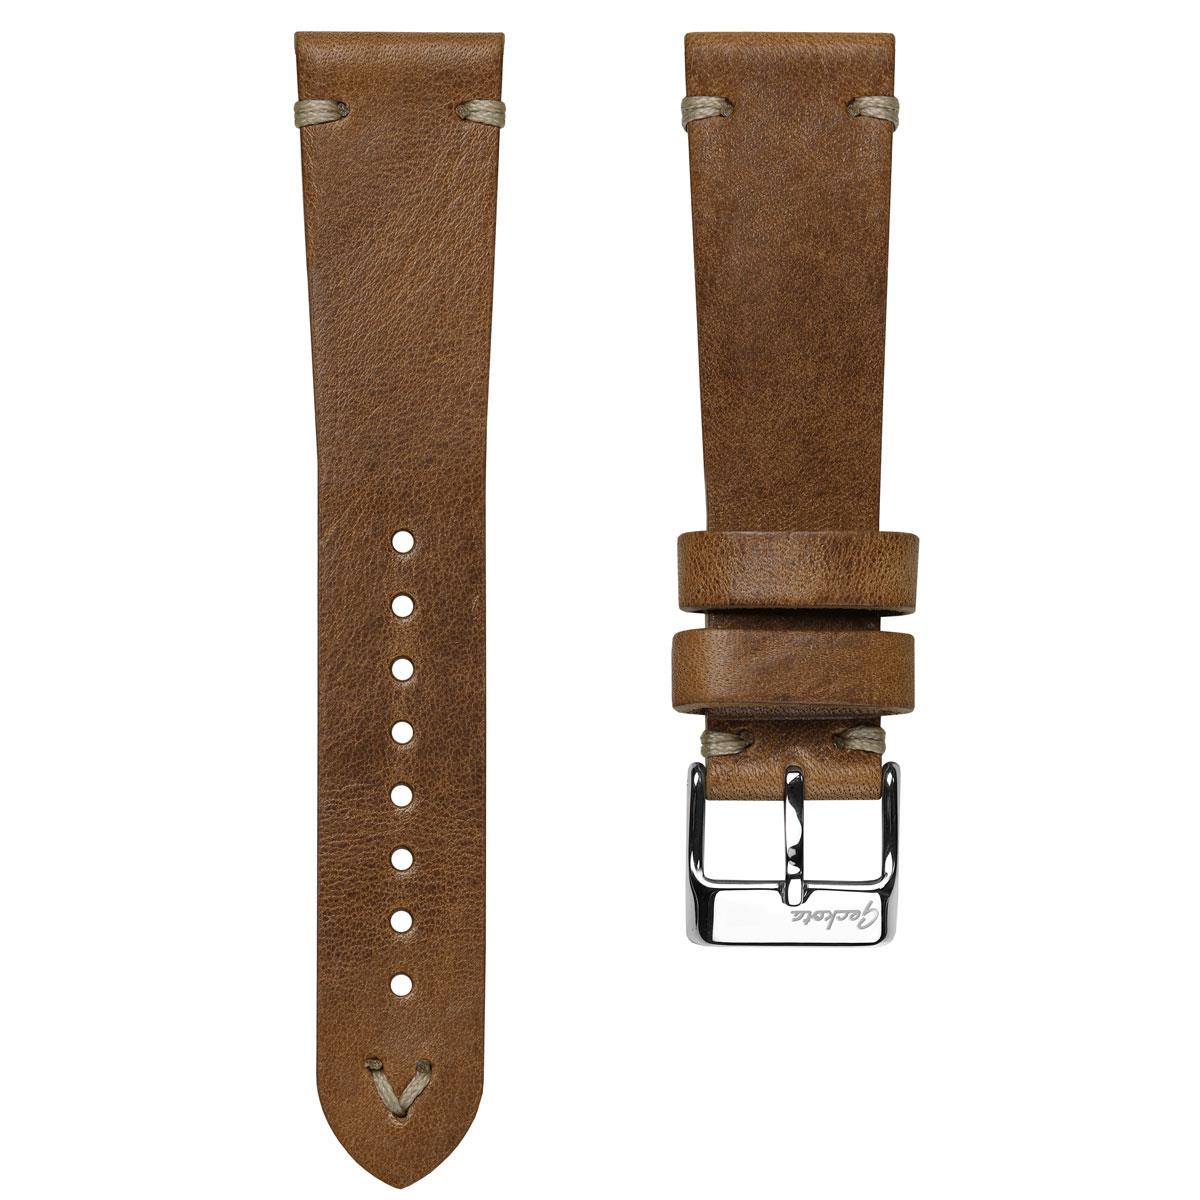 Watchbands & Watches- Timeless Watchbands and Watch Straps